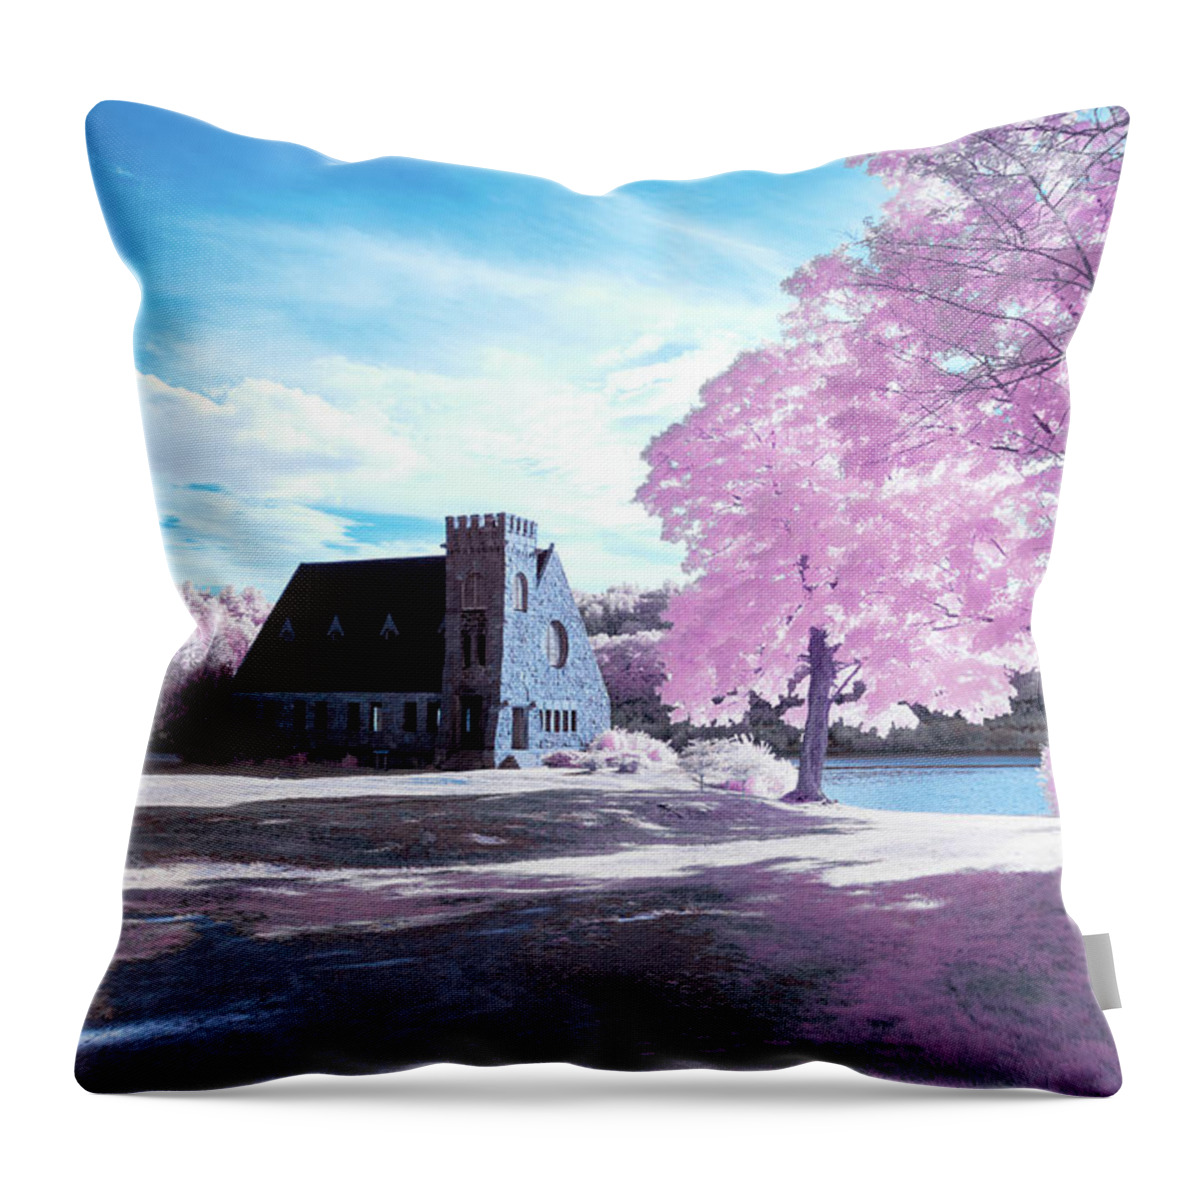 Old Stone Church West Boylston W W. Architecture Stonewall Outside Outdoors Sky Clouds Trees Bushes Brush Grass Geese Birds Newengland New England U.s.a. Usa Brian Hale Brianhalephoto Ir Infrared Infra Red Historic Throw Pillow featuring the photograph Cotton Candy Church by Brian Hale